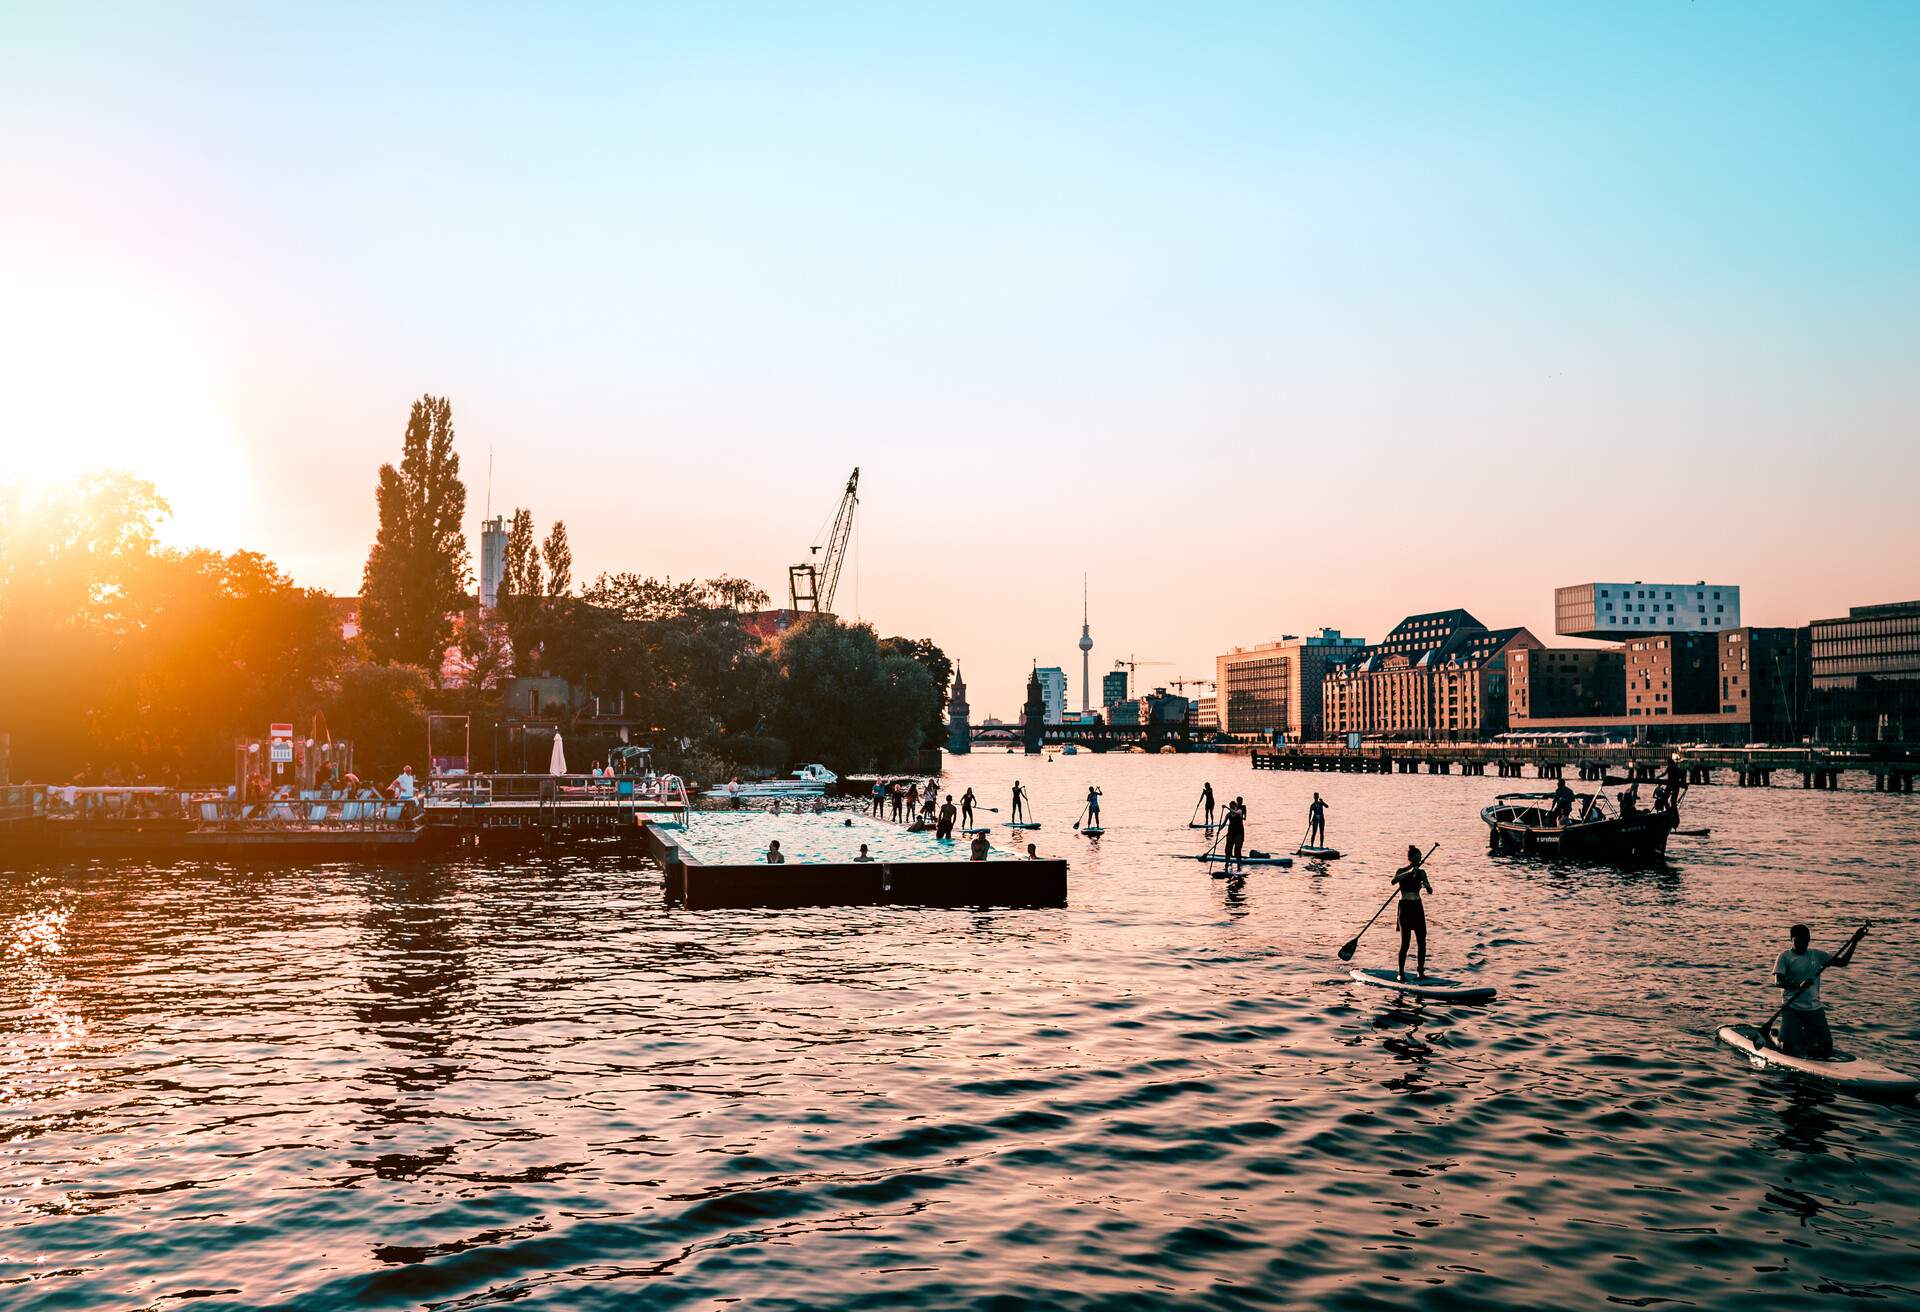 DEST_GERMANY_BERLIN_MITTE_SPREE-RIVER_THEME_PEOPLE_PADDLEBOARDING_SWIMMING_badeschiff_SUNSET_SUMMER-GettyImages-713869815